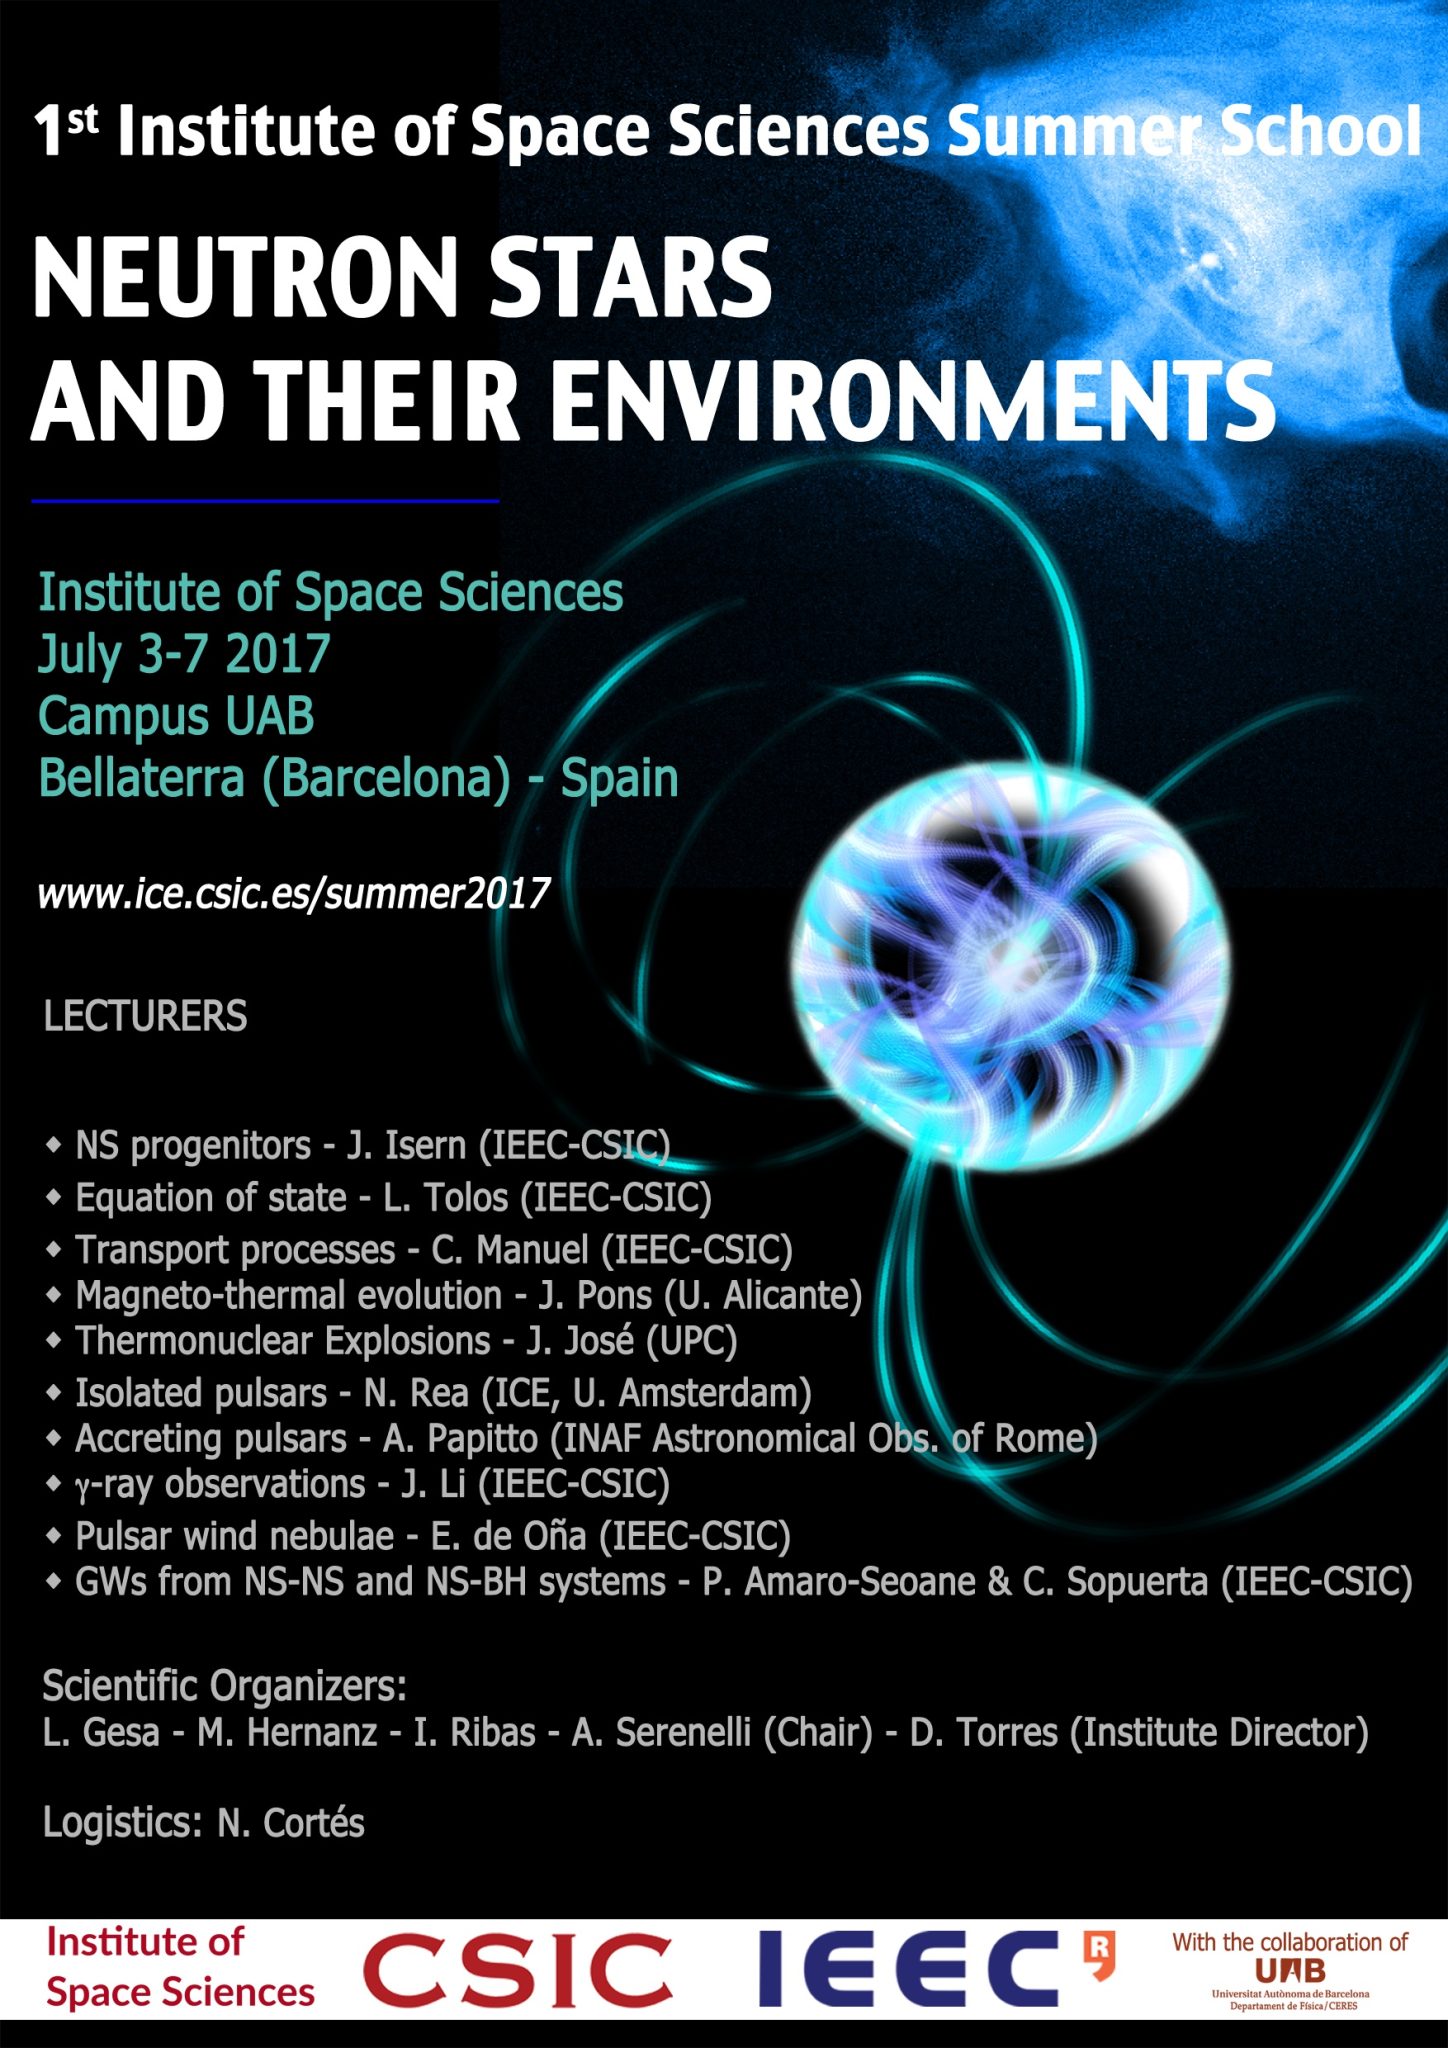 1st Institute of Space Sciences Summer School: Neutron Stars And Their Environments